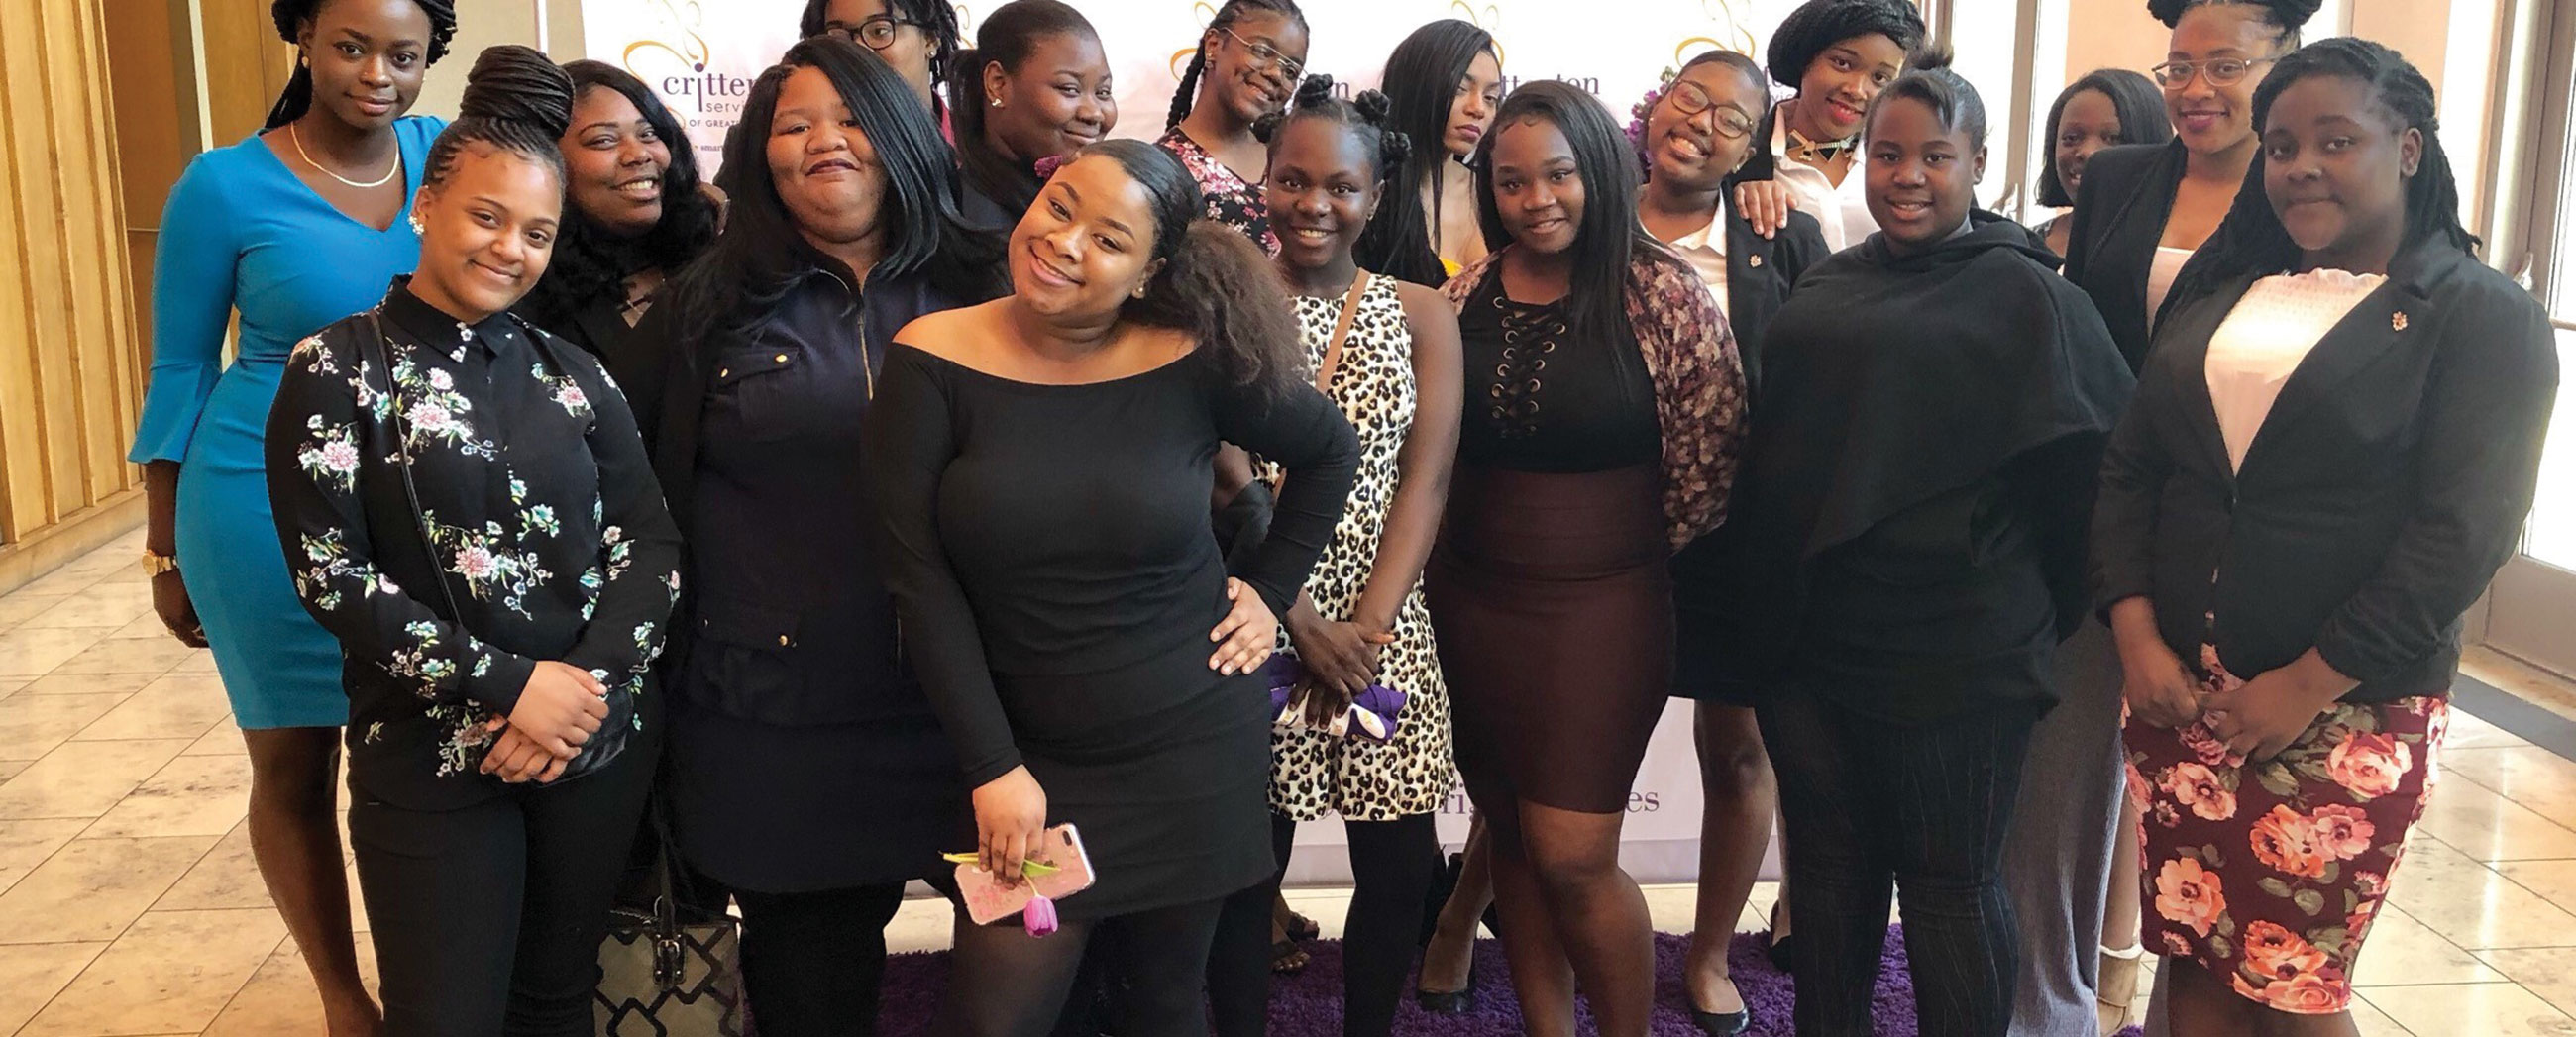 The Beauty of Giving; HITS Beauty Brand Gives $3,000 Worth of Beauty Products to Virginia-Based Teen Girl Empowerment Organization